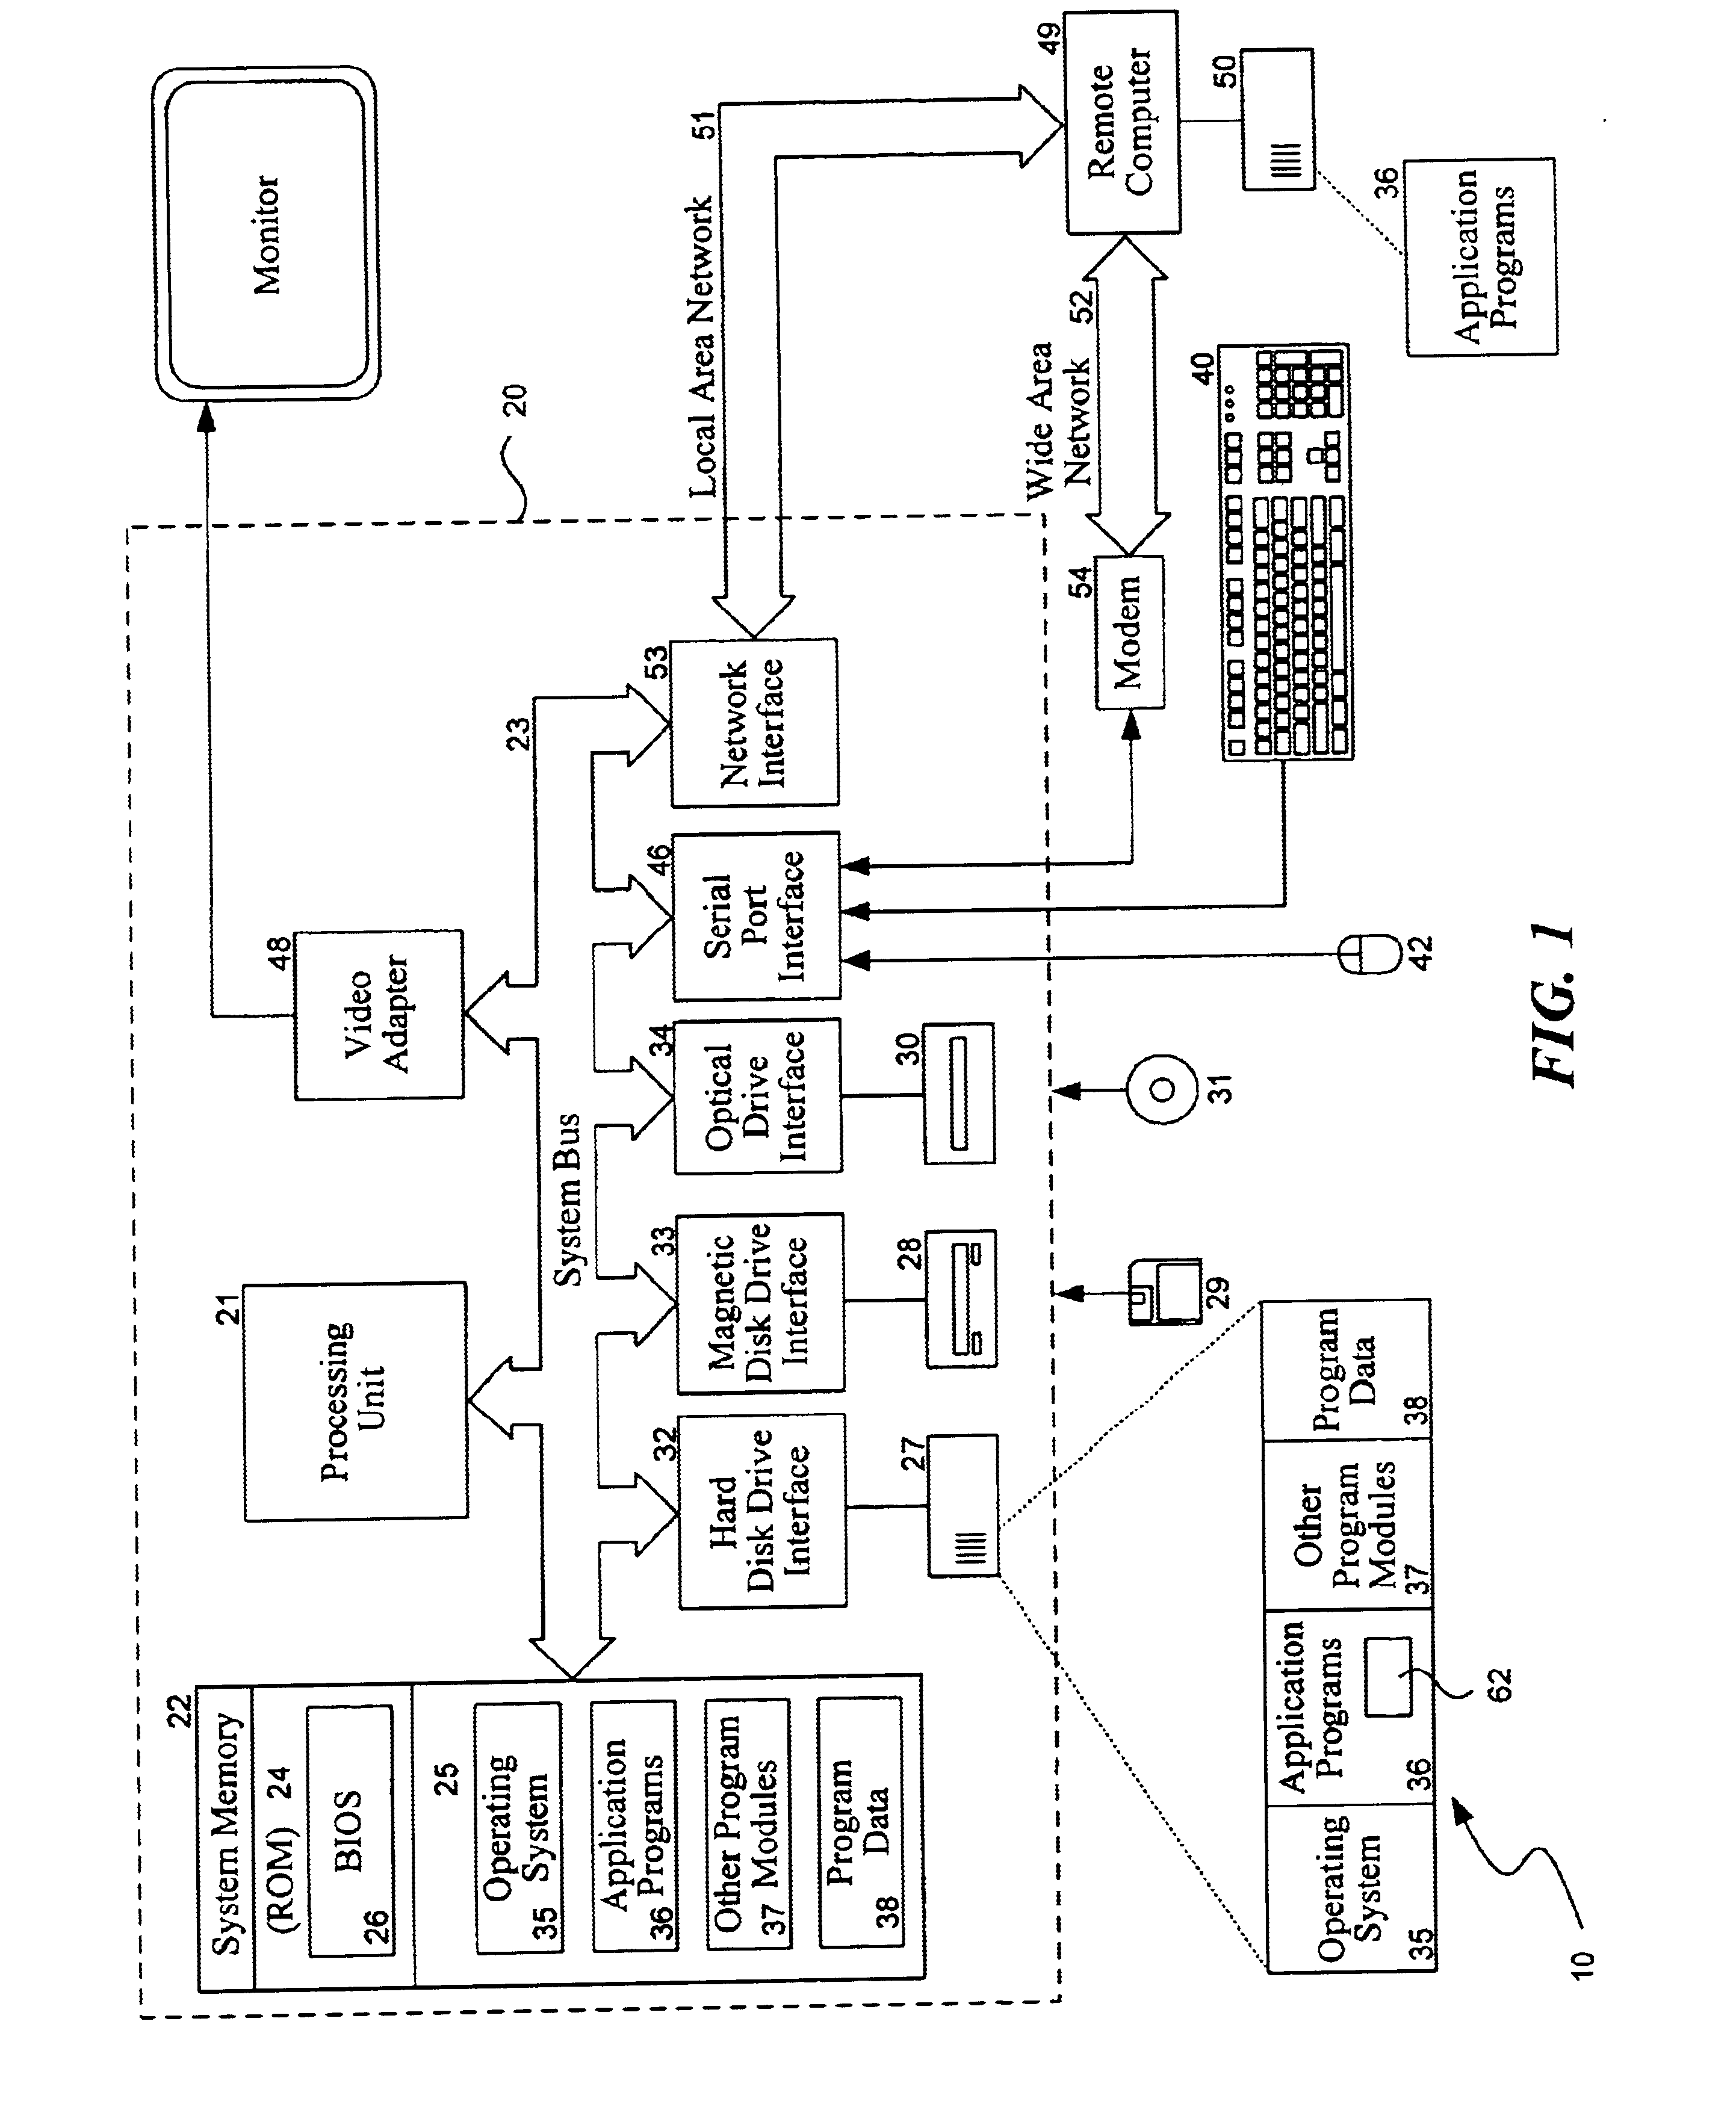 Multimedia communications software with network streaming and multi-format conferencing